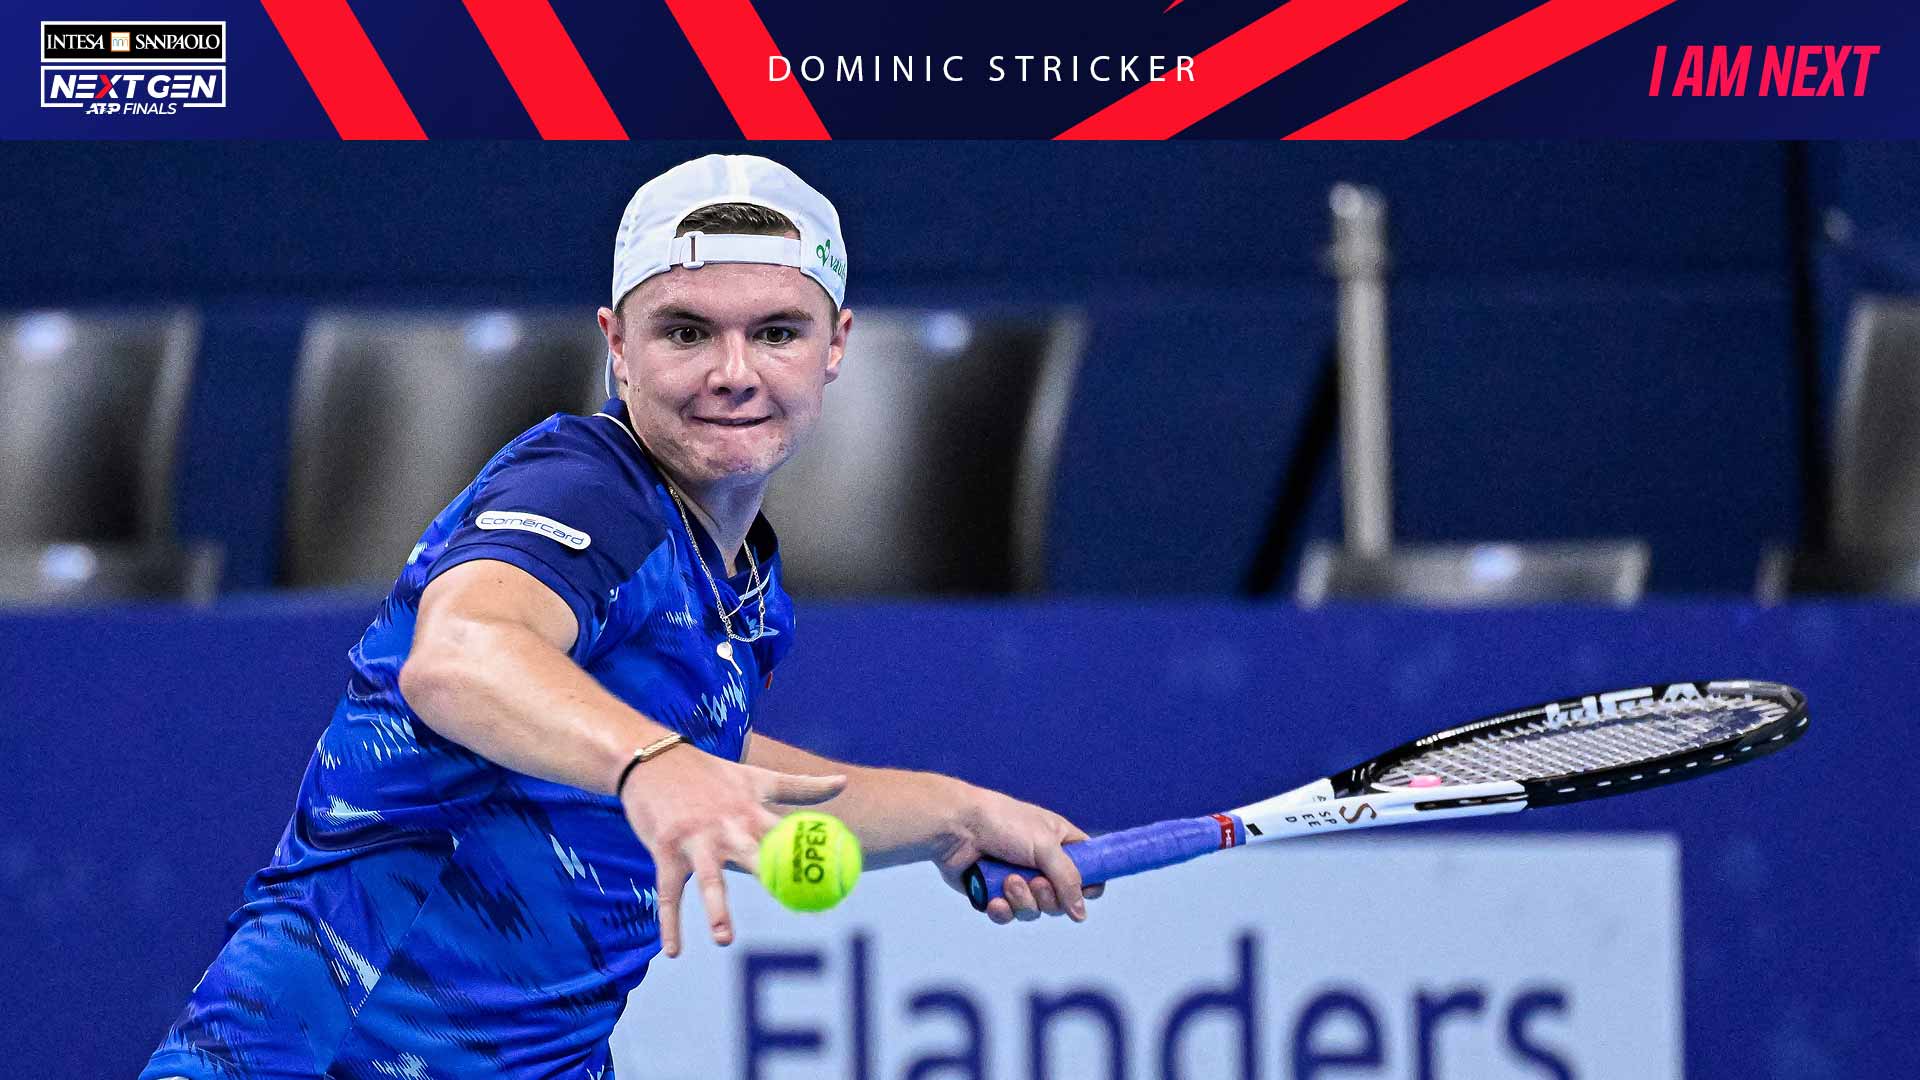 Dominic Stricker is the first Swiss player to qualify for the Intesa Sanpaolo Next Gen ATP Finals in event history (since 2017).